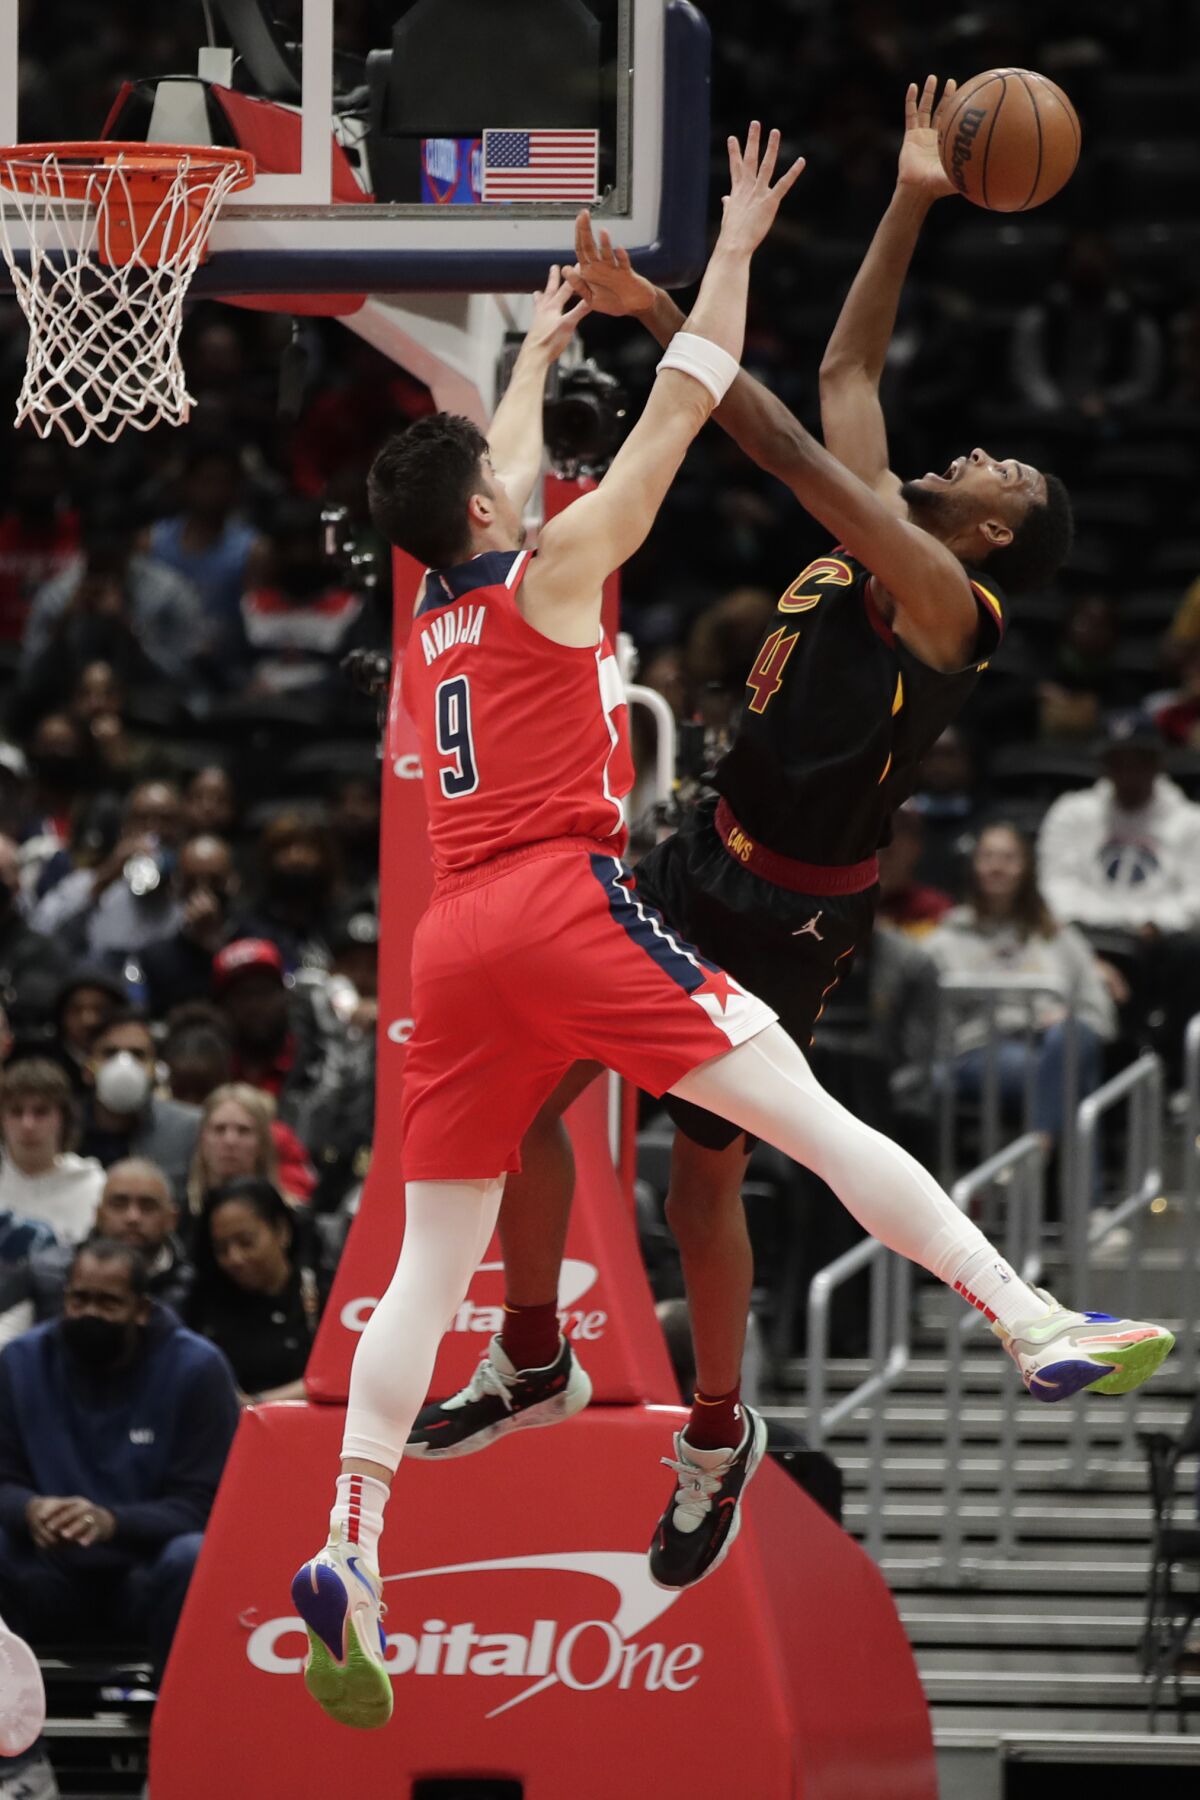 Cleveland Cavaliers' Evan Mobley, right, attempts to shoot as Washington Wizards' Deni Avdija (9) defends during the first half of an NBA basketball game, Friday, Dec. 3, 2021, in Washington. (AP Photo/Luis M. Alvarez)